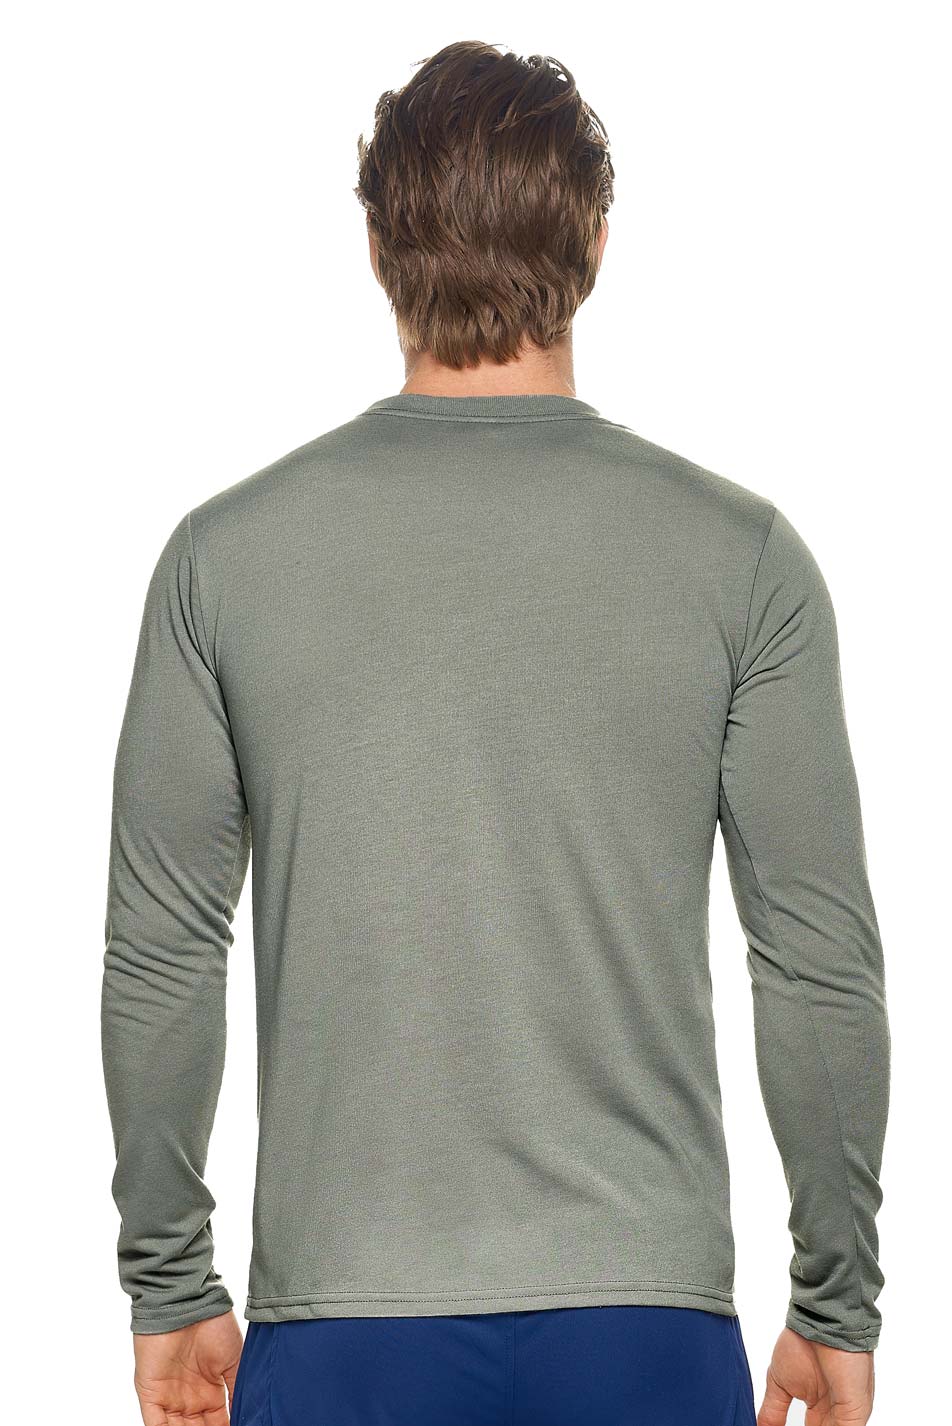 Expert Brand Wholesale Men's In the Field Outdoors Long Sleeve Tee Made in USA PT808 Army Gray image 3#army-gray